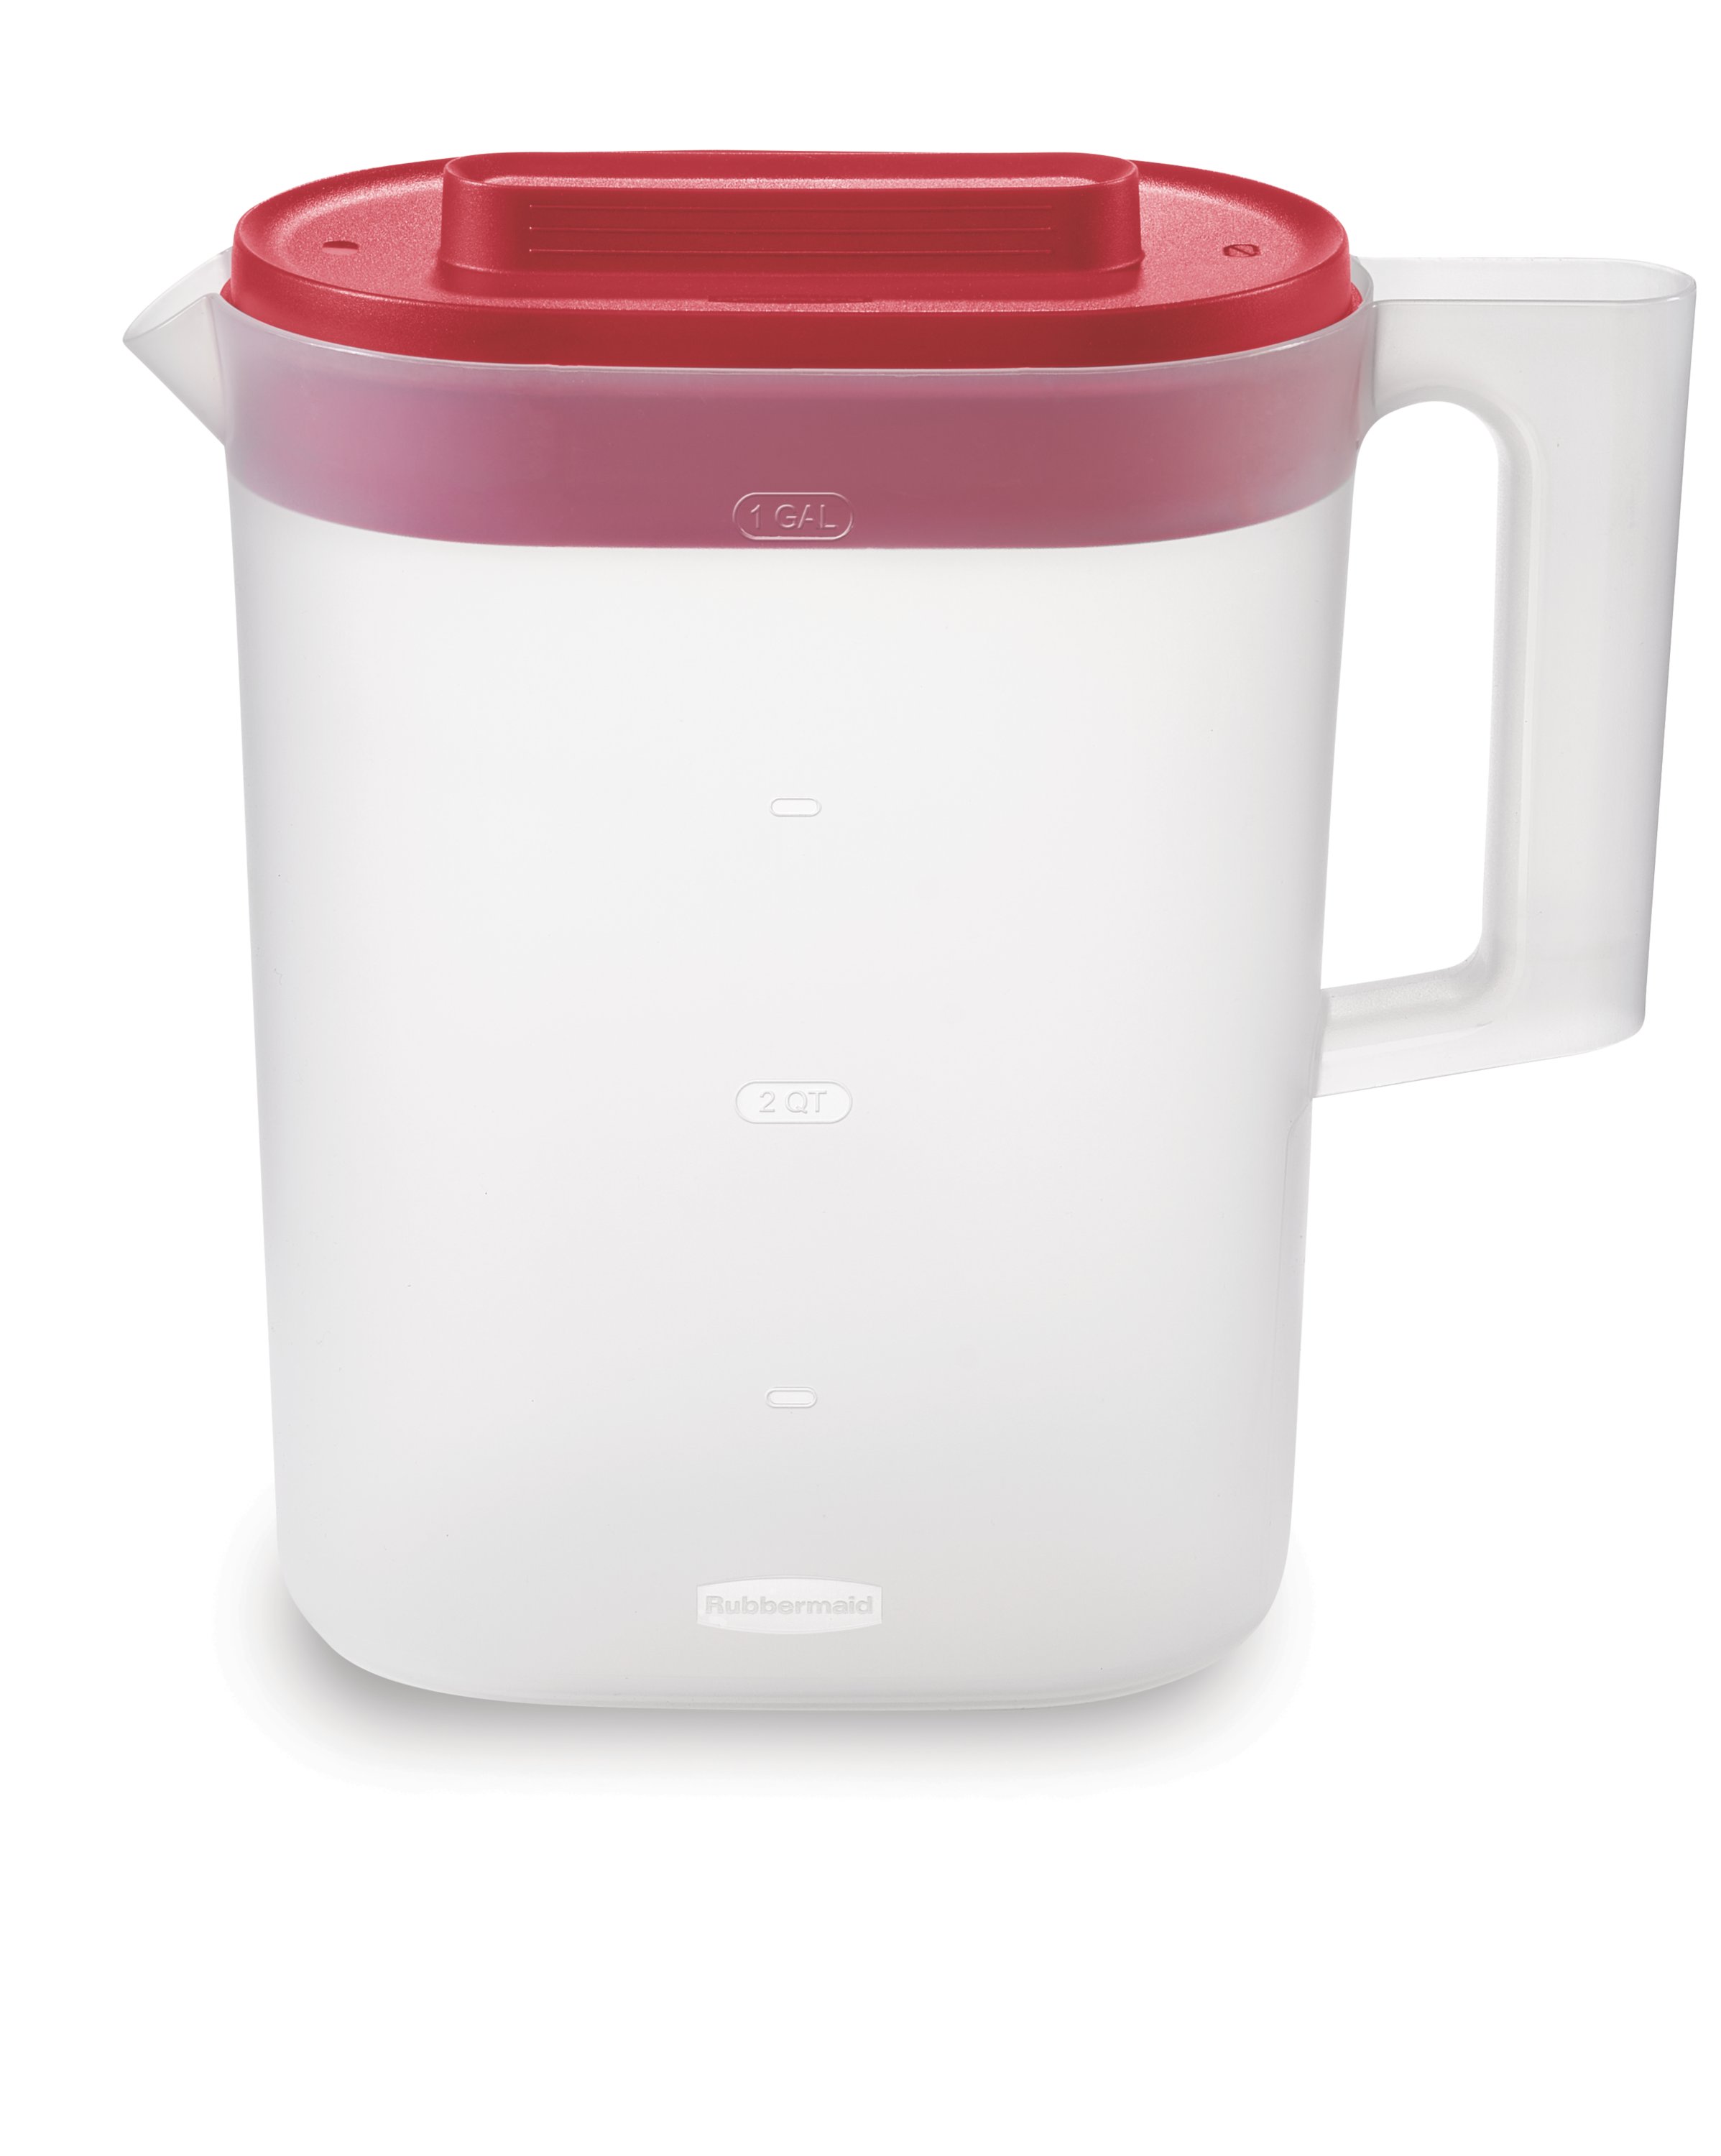 https://s7d9.scene7.com/is/image/NewellRubbermaid/2122602-rubbermaid-food-storage-compact-pitcher-1g-red-straight-on